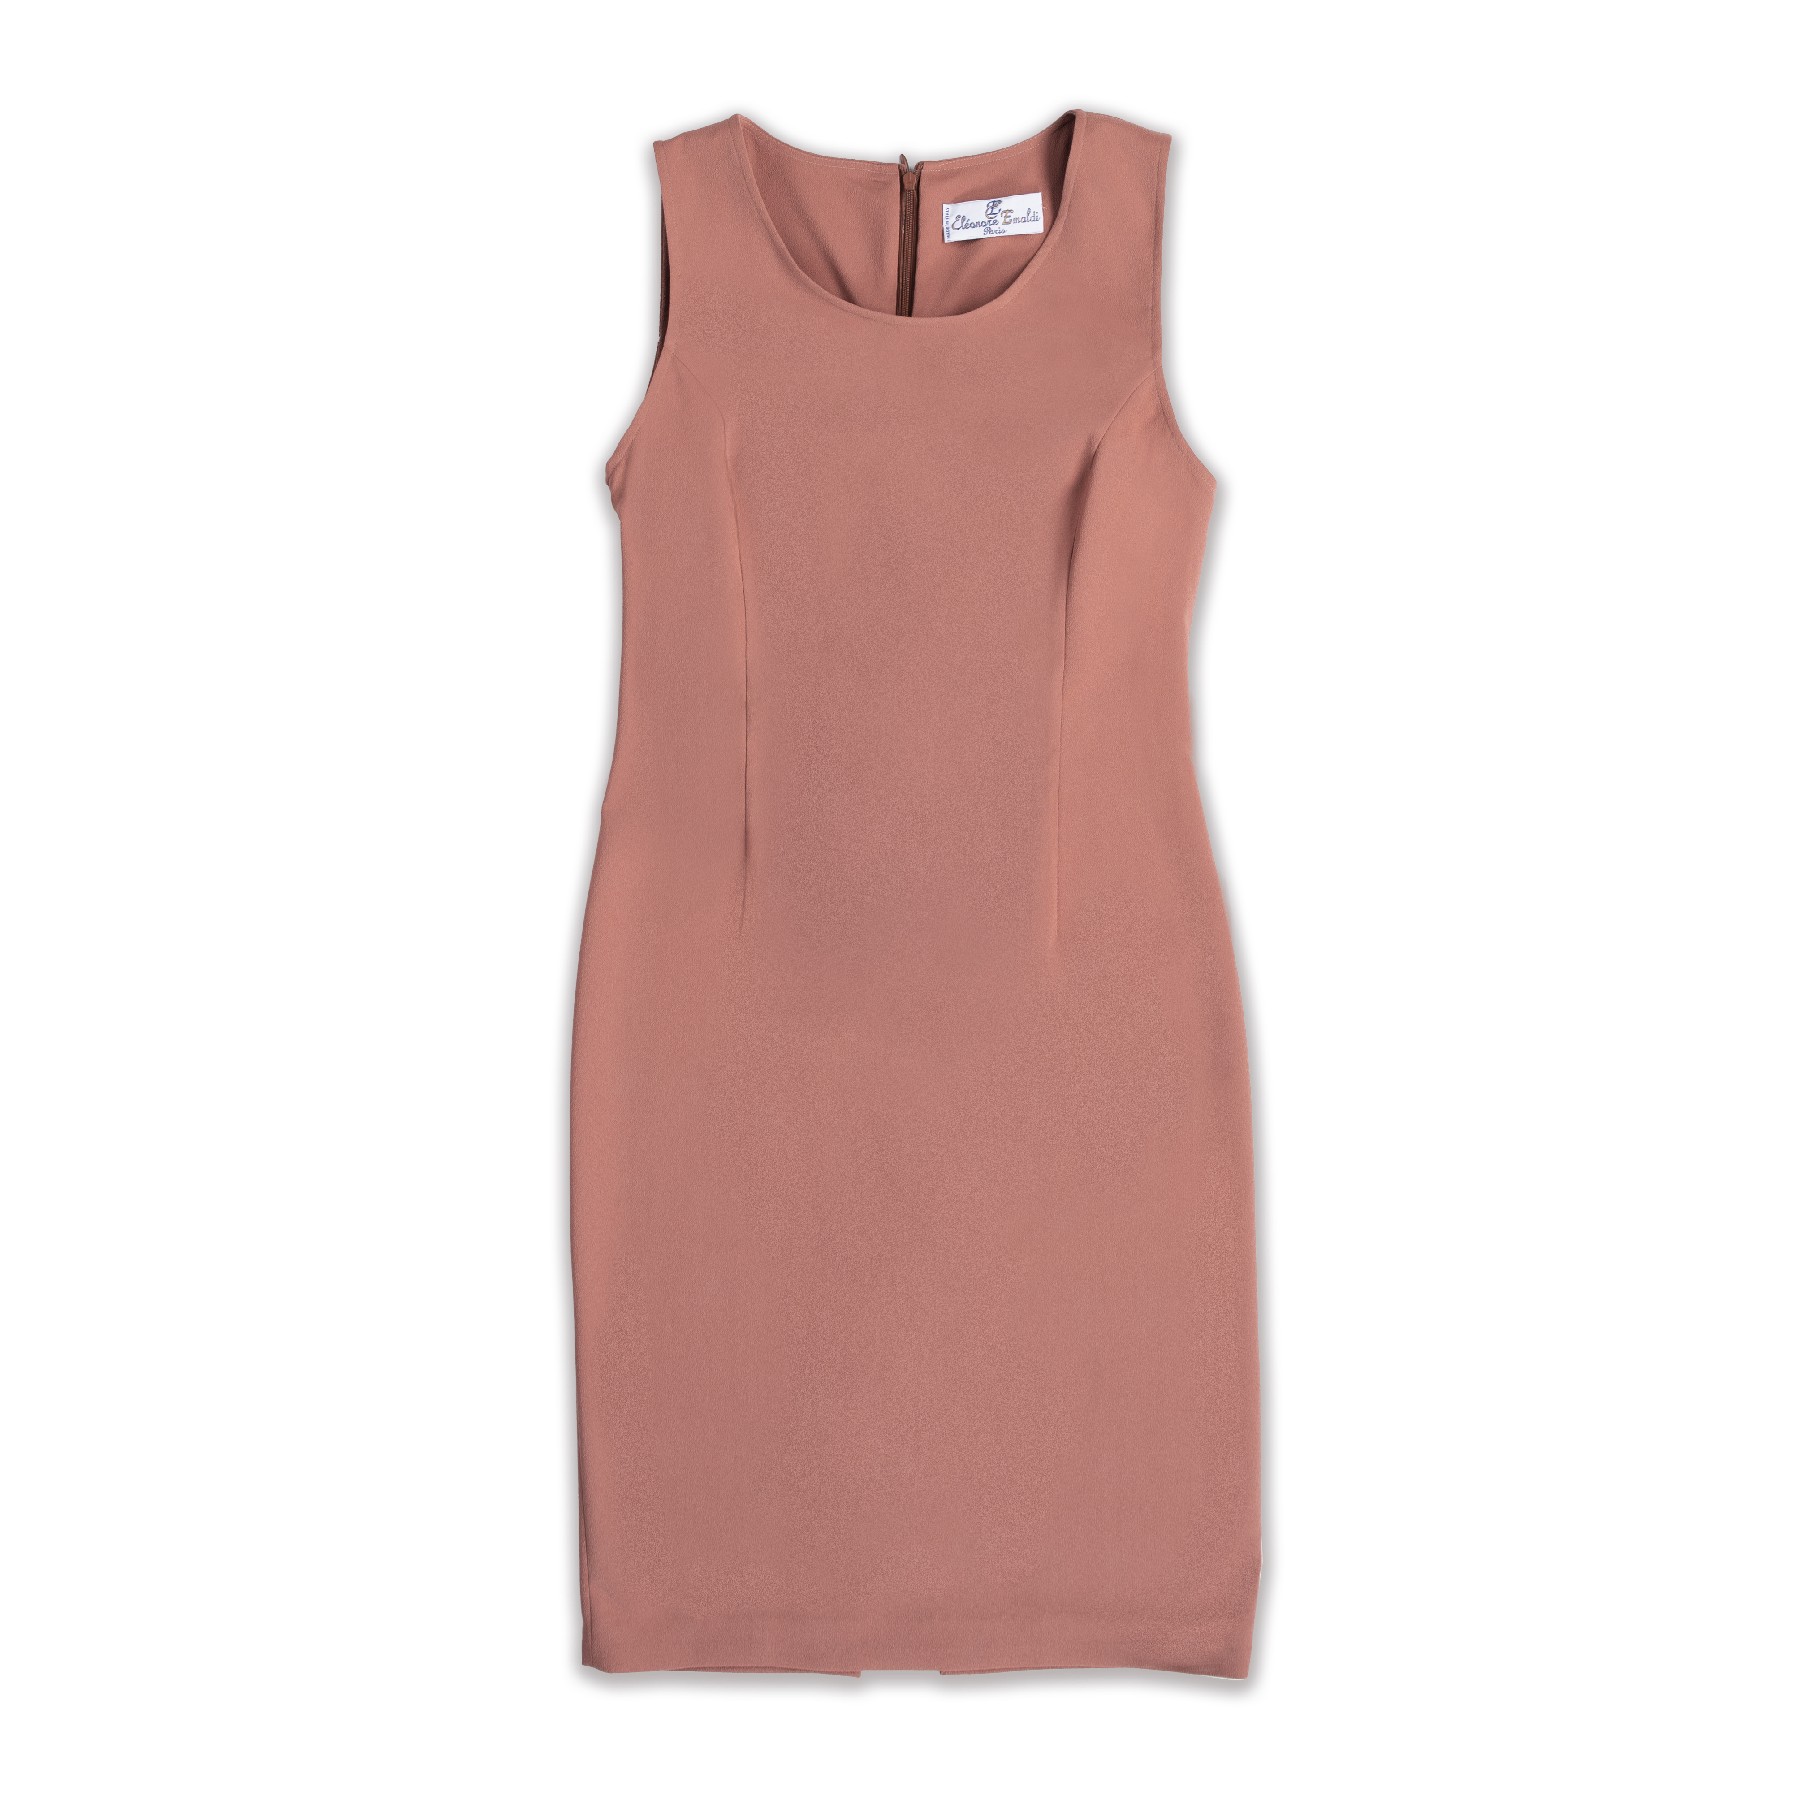 Straight dress style "Jacky" sleeveless in silk crepe and viscose